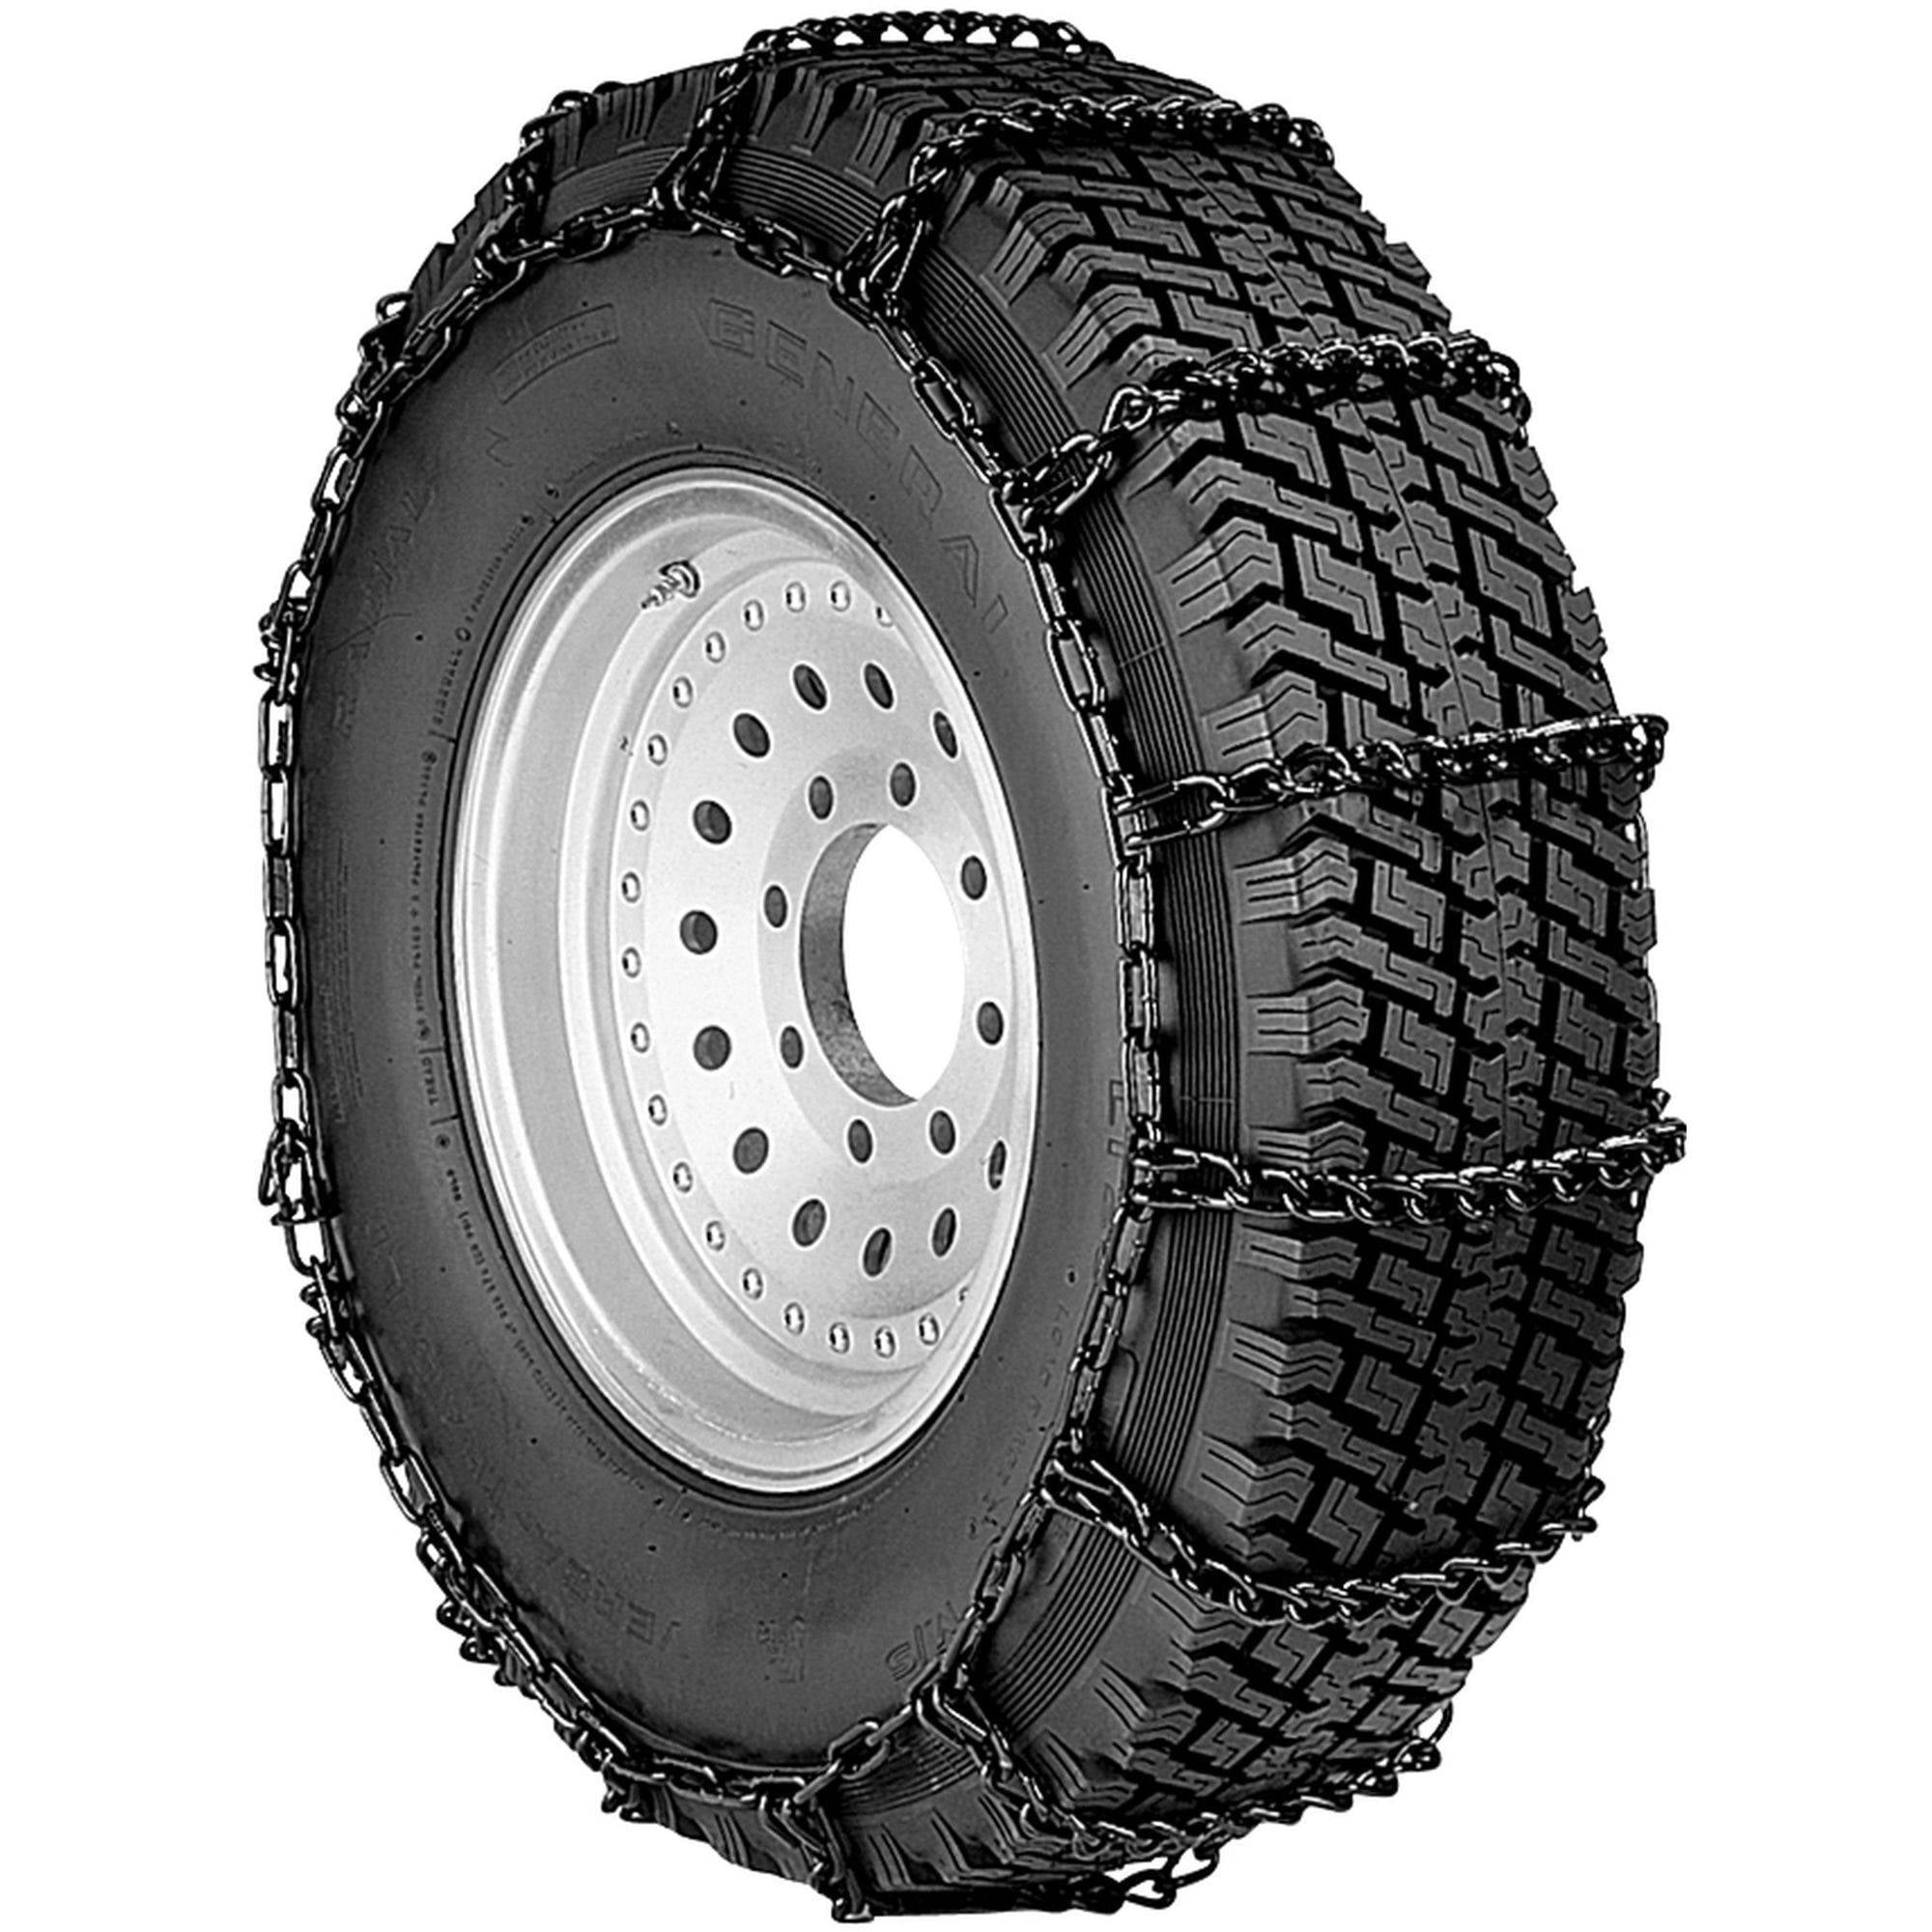 priced per pair Snow Chains Emergency Strap on for SUV's and Pick-Up Trucks 